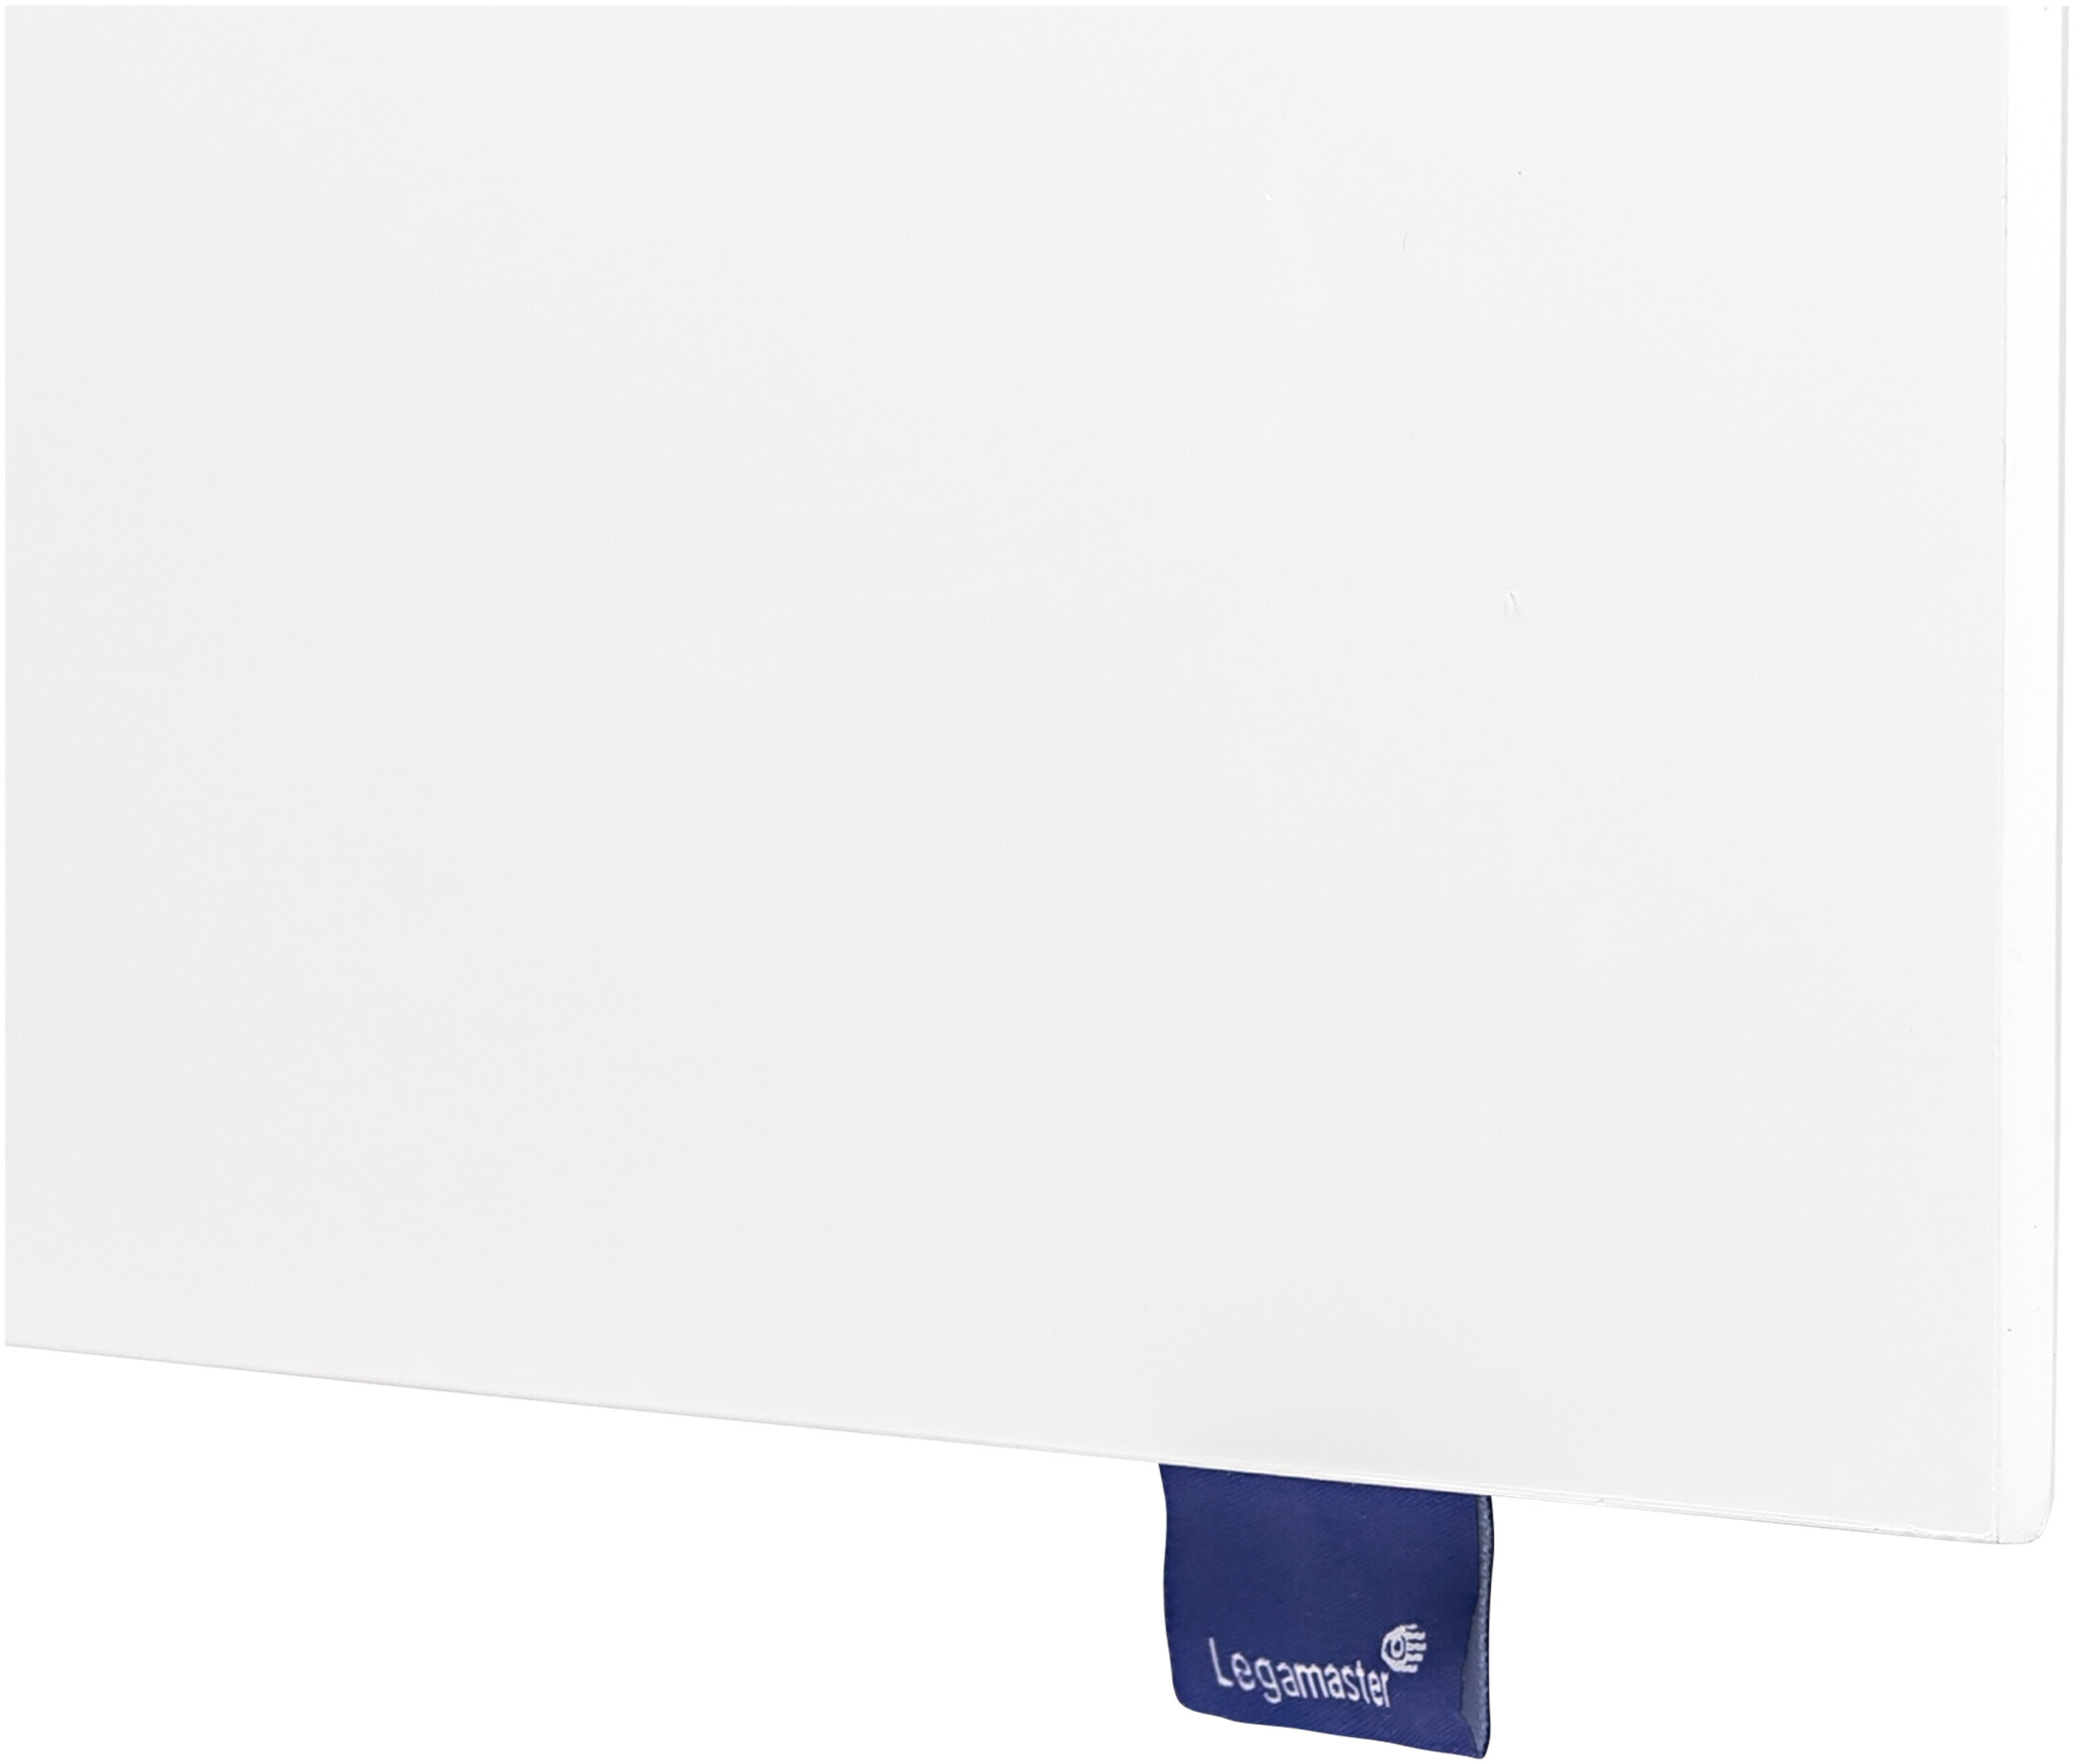 Legamaster-WALL-UP-Whiteboard-200-x-119-5-cm